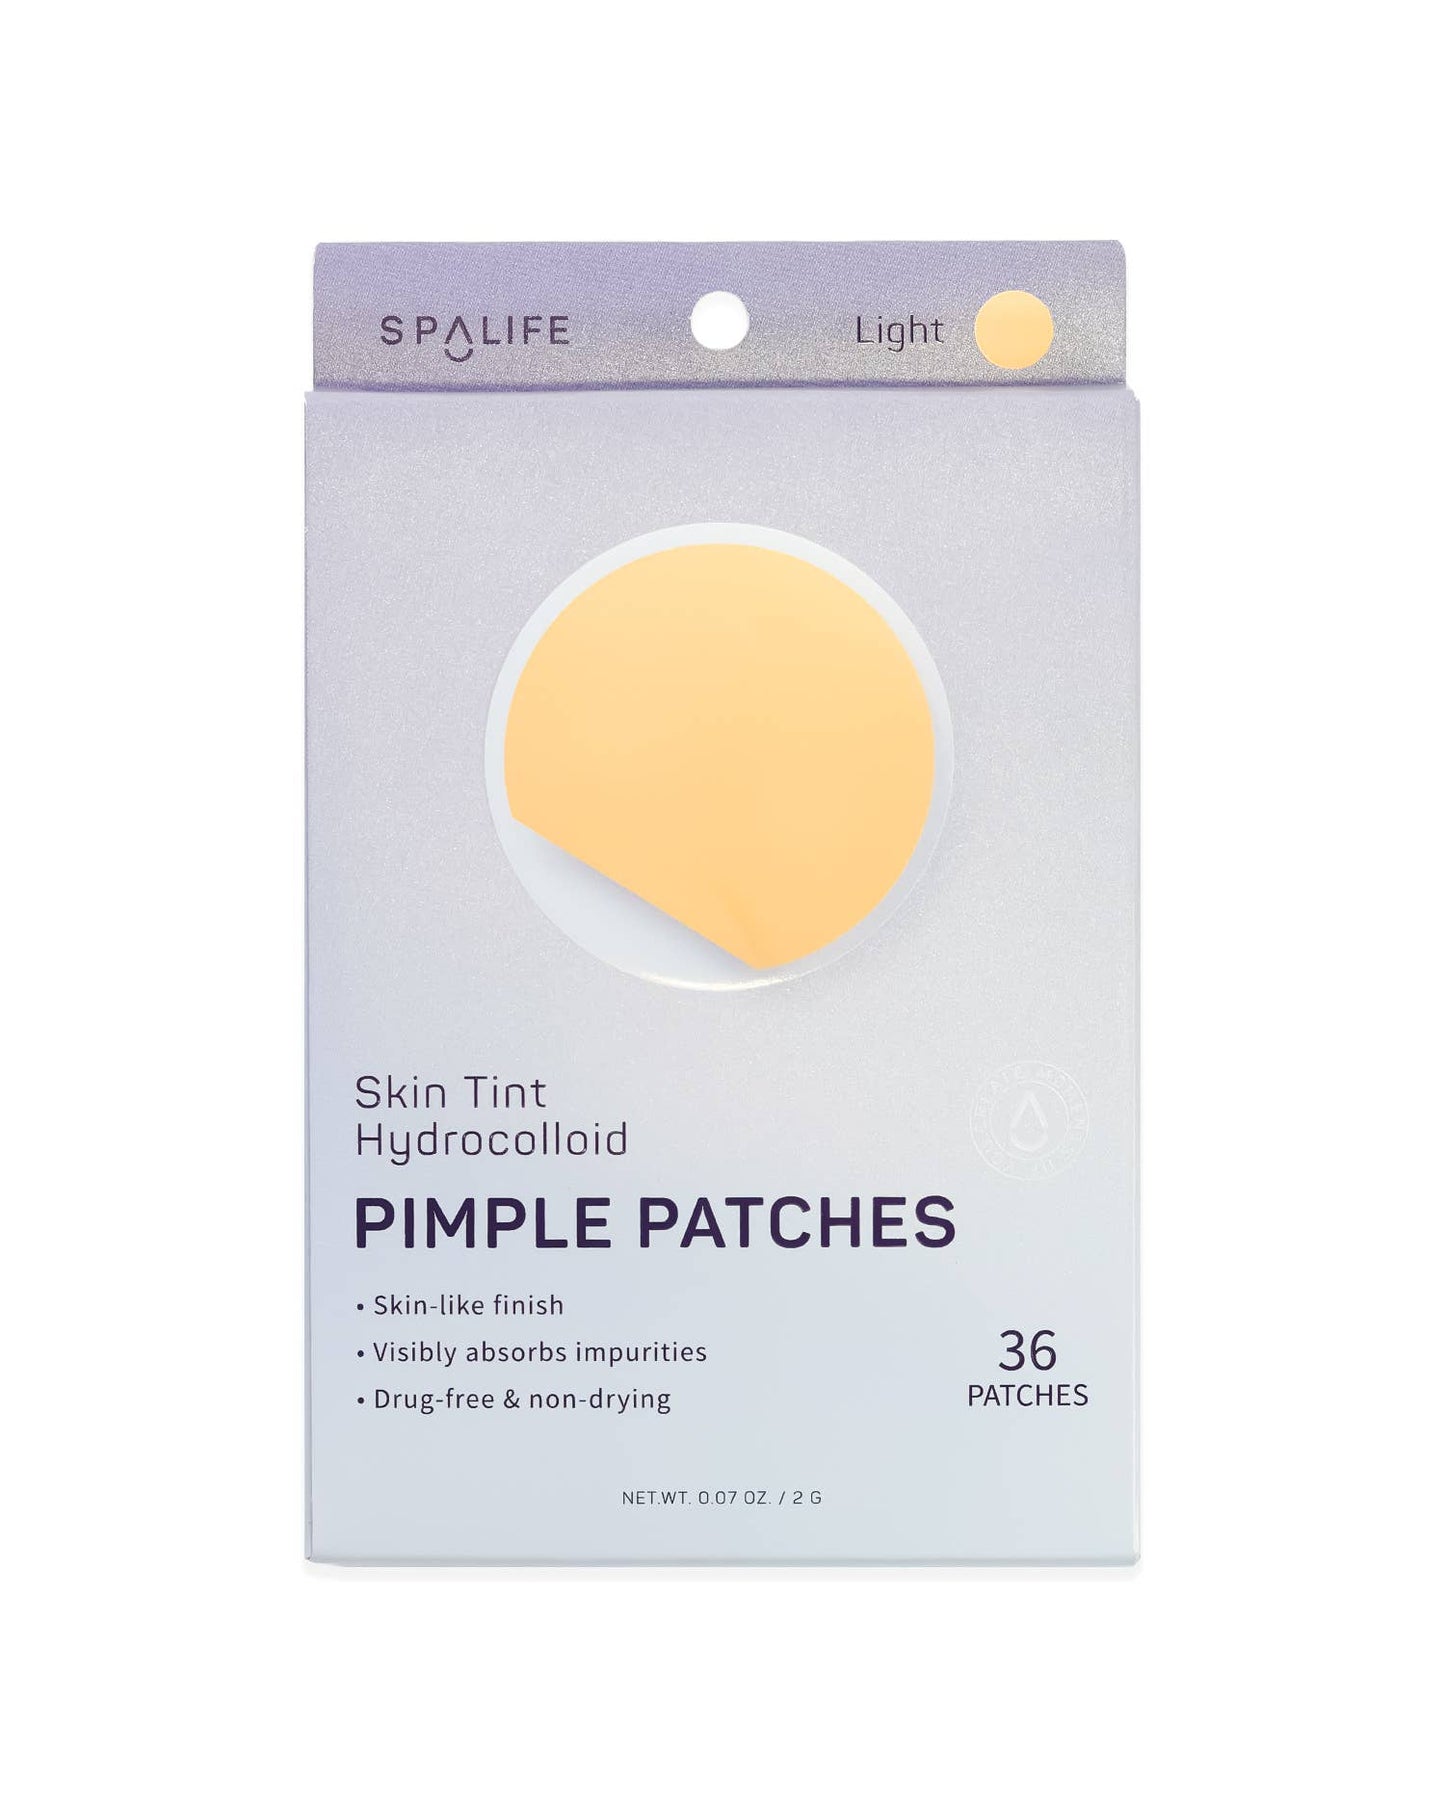 Skin Tint Hydrocolloid Pimple Patches 36 Patches - Light